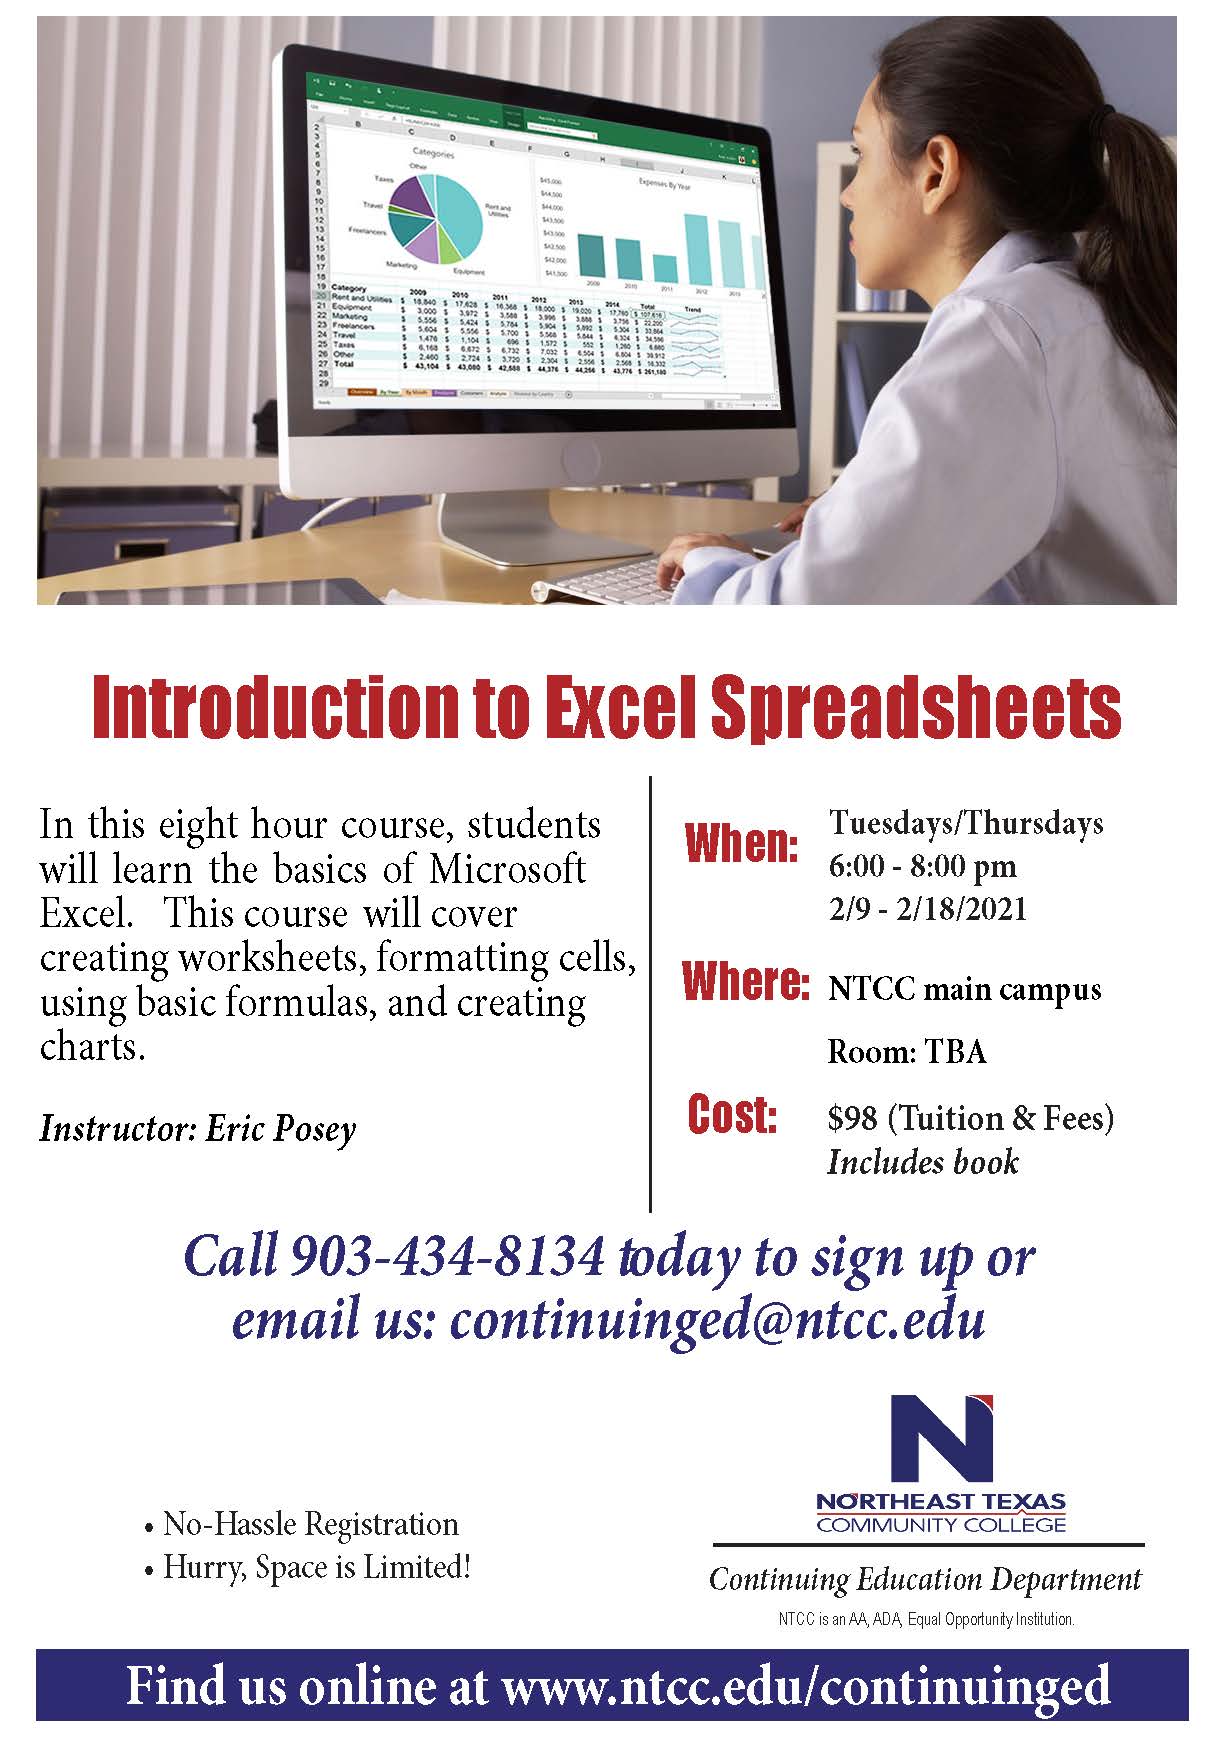 Introduction to Excel Spreadsheets